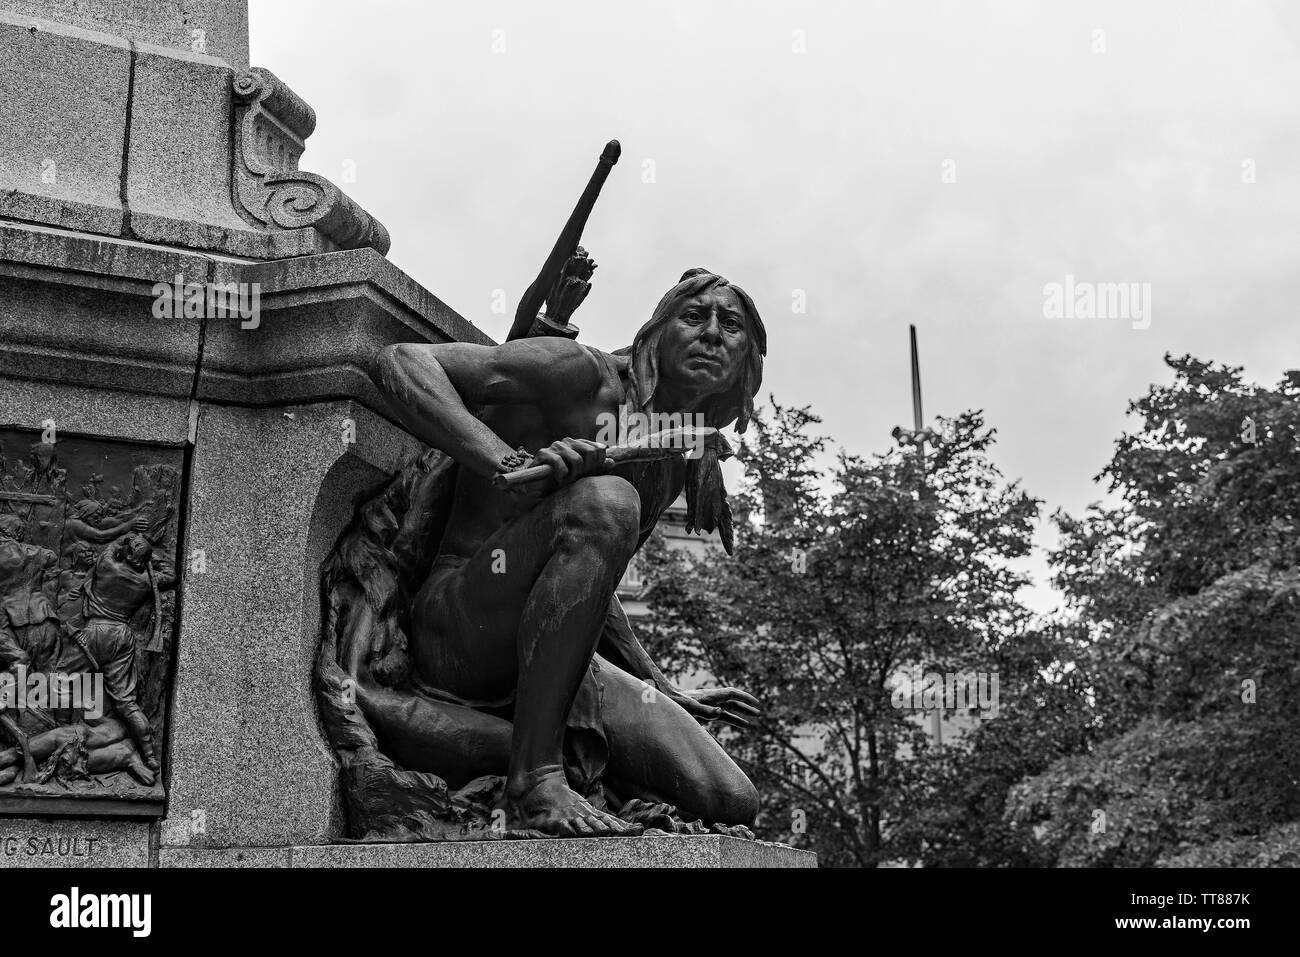 North American Indian Statue on Monument-Old Montreal. Stock Photo